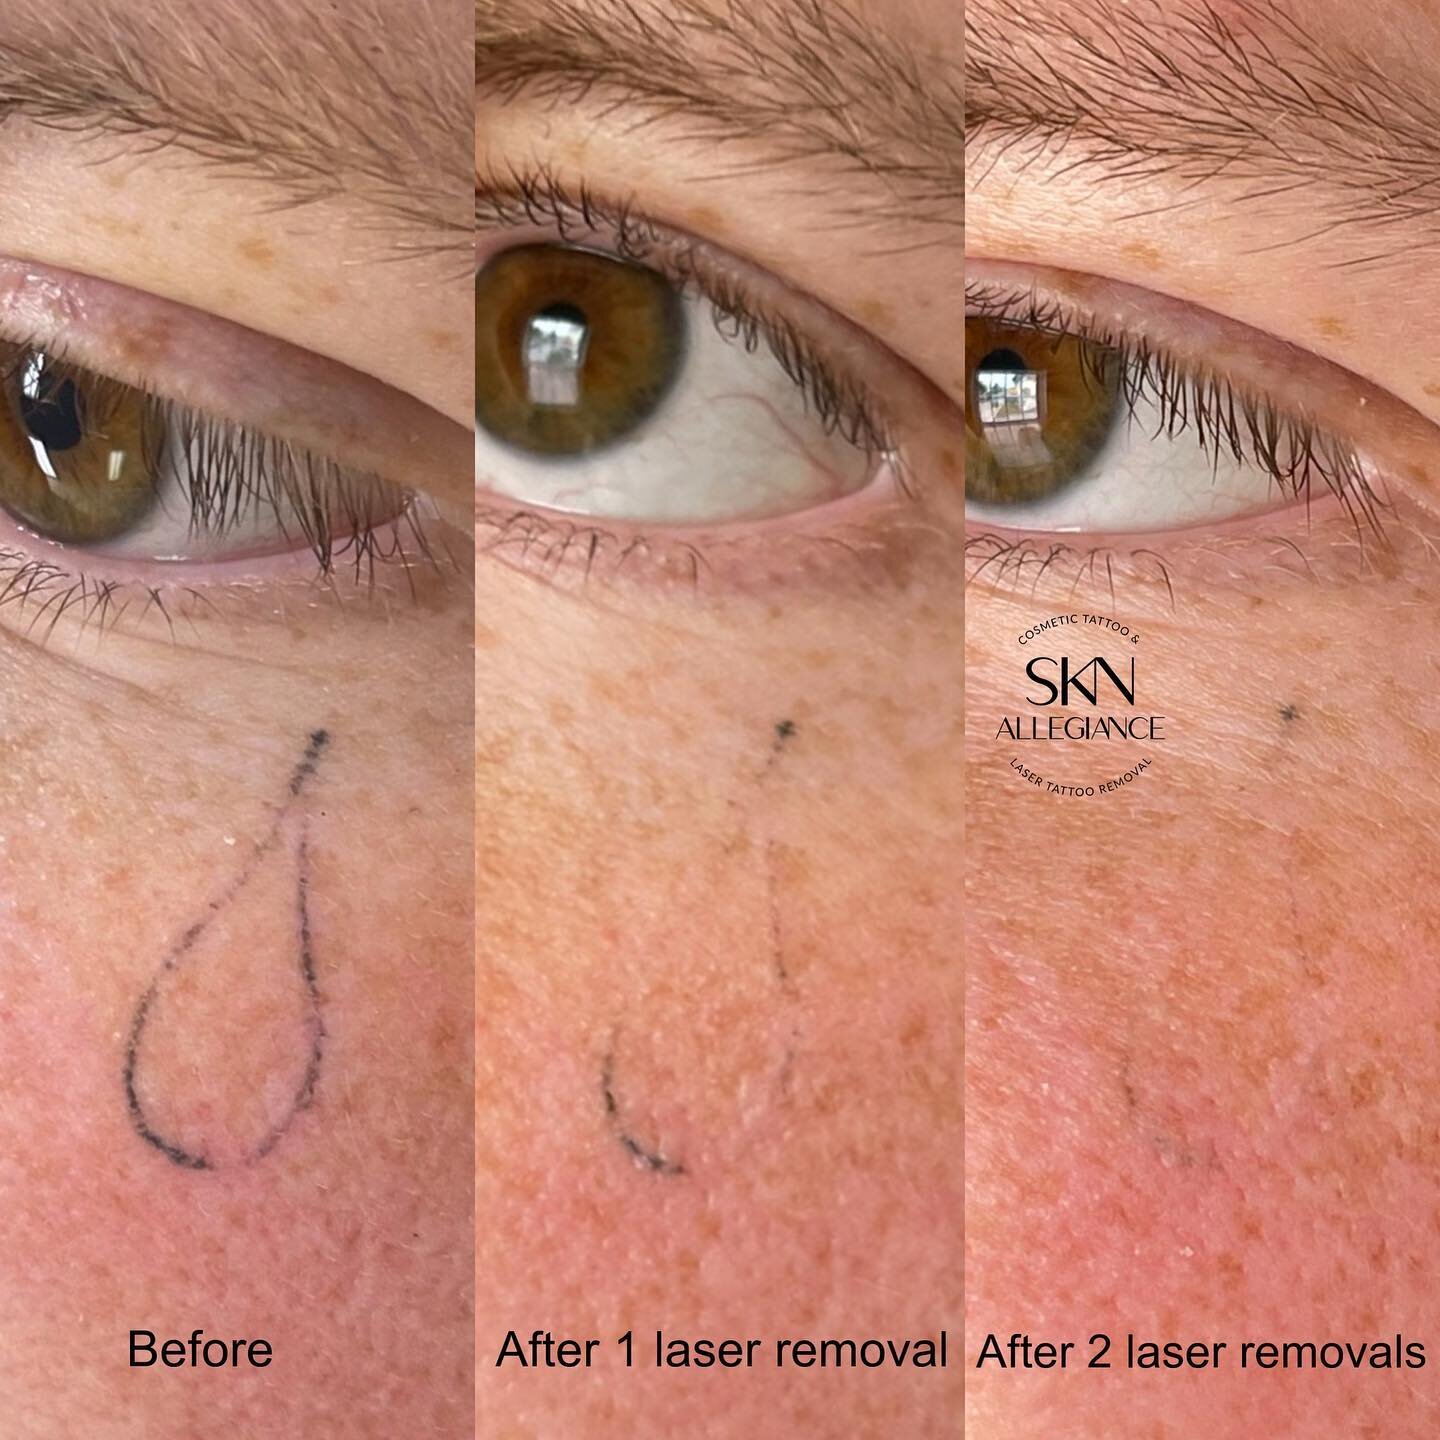 Wipe away your tears! No more suffering from looking at a tattoo you no longer like🥲
Laser removal makes it possible to get rid of ink and do so safely for your skin!😉
⠀
*Every tattoo (and client) is unique and will have a different fading progress